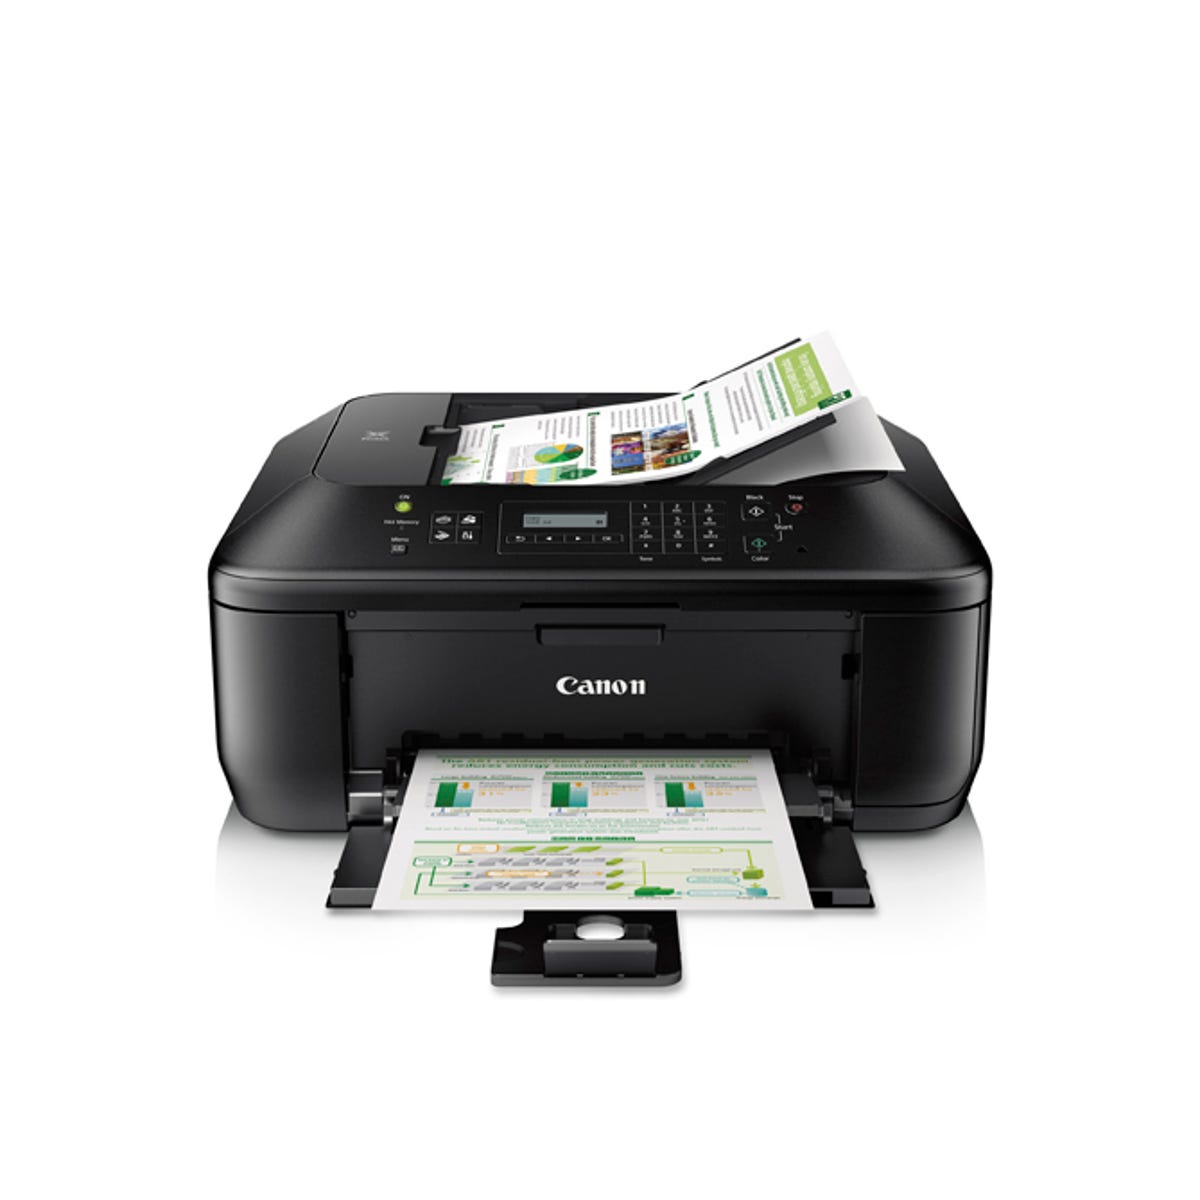 Canon MX922 review: Four new Canon Pixma inkjets prove printers can keep up at CES 2013 - CNET